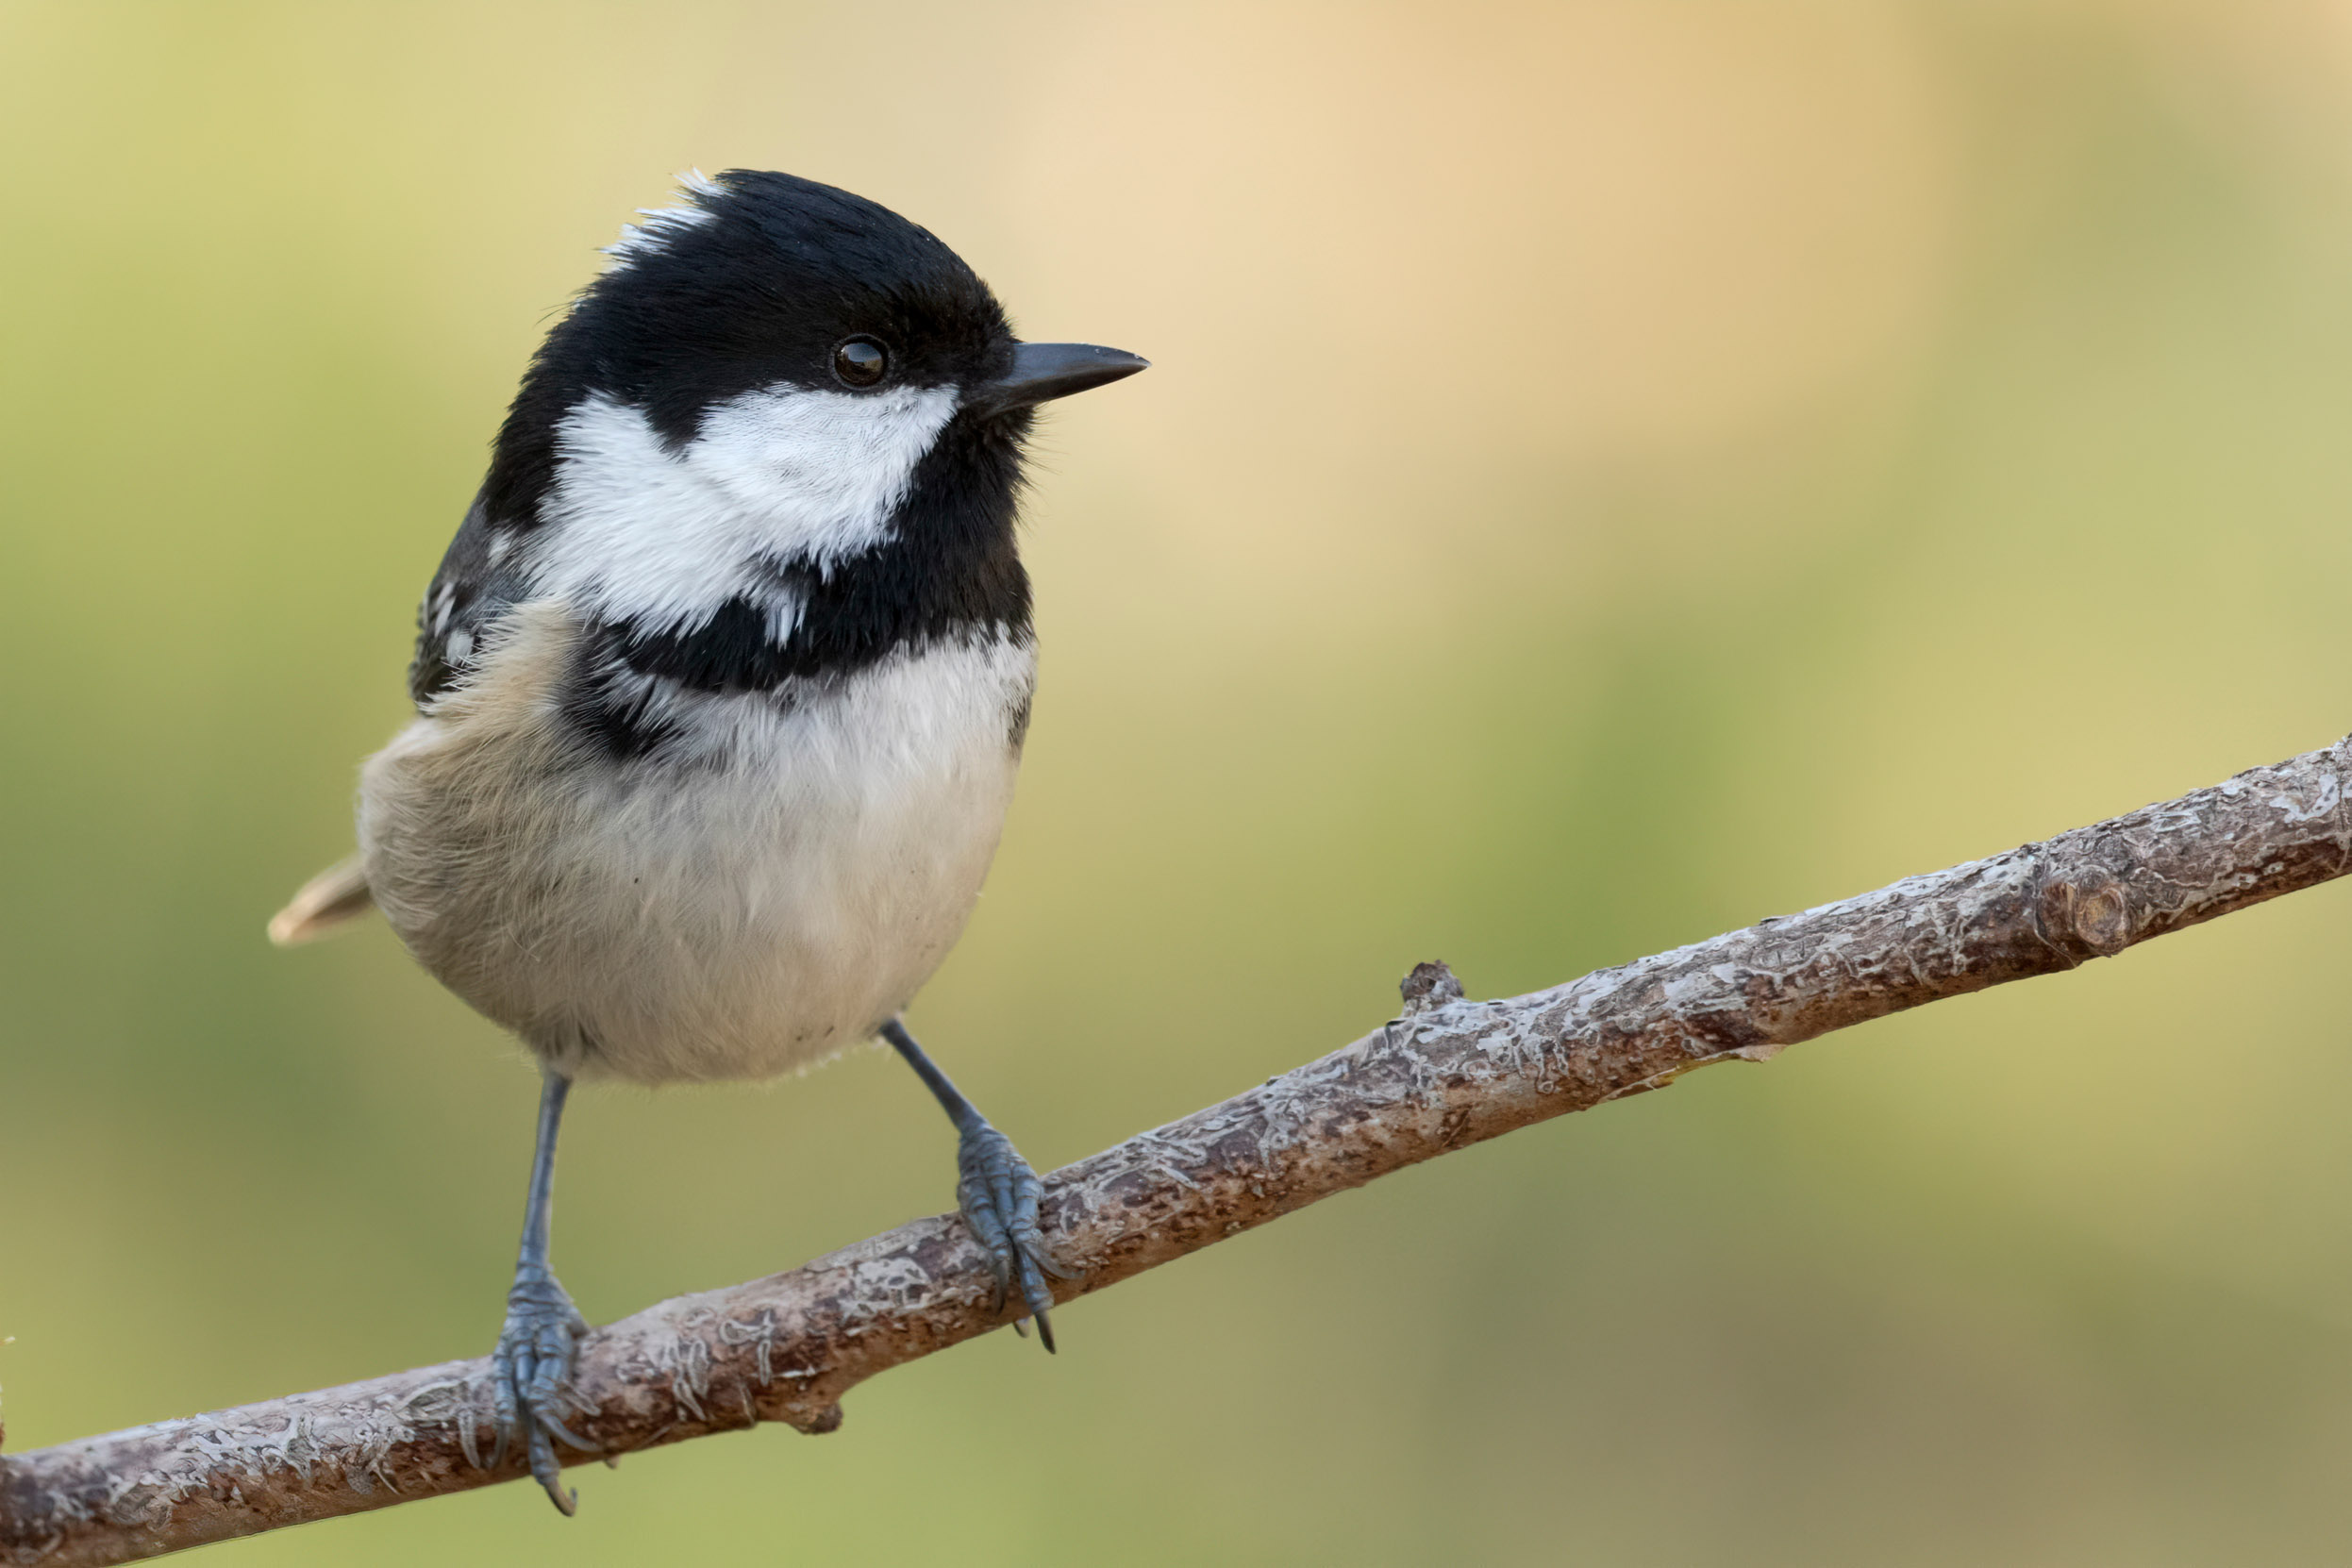 A lone Coal Tit perched on a small woodland branch.